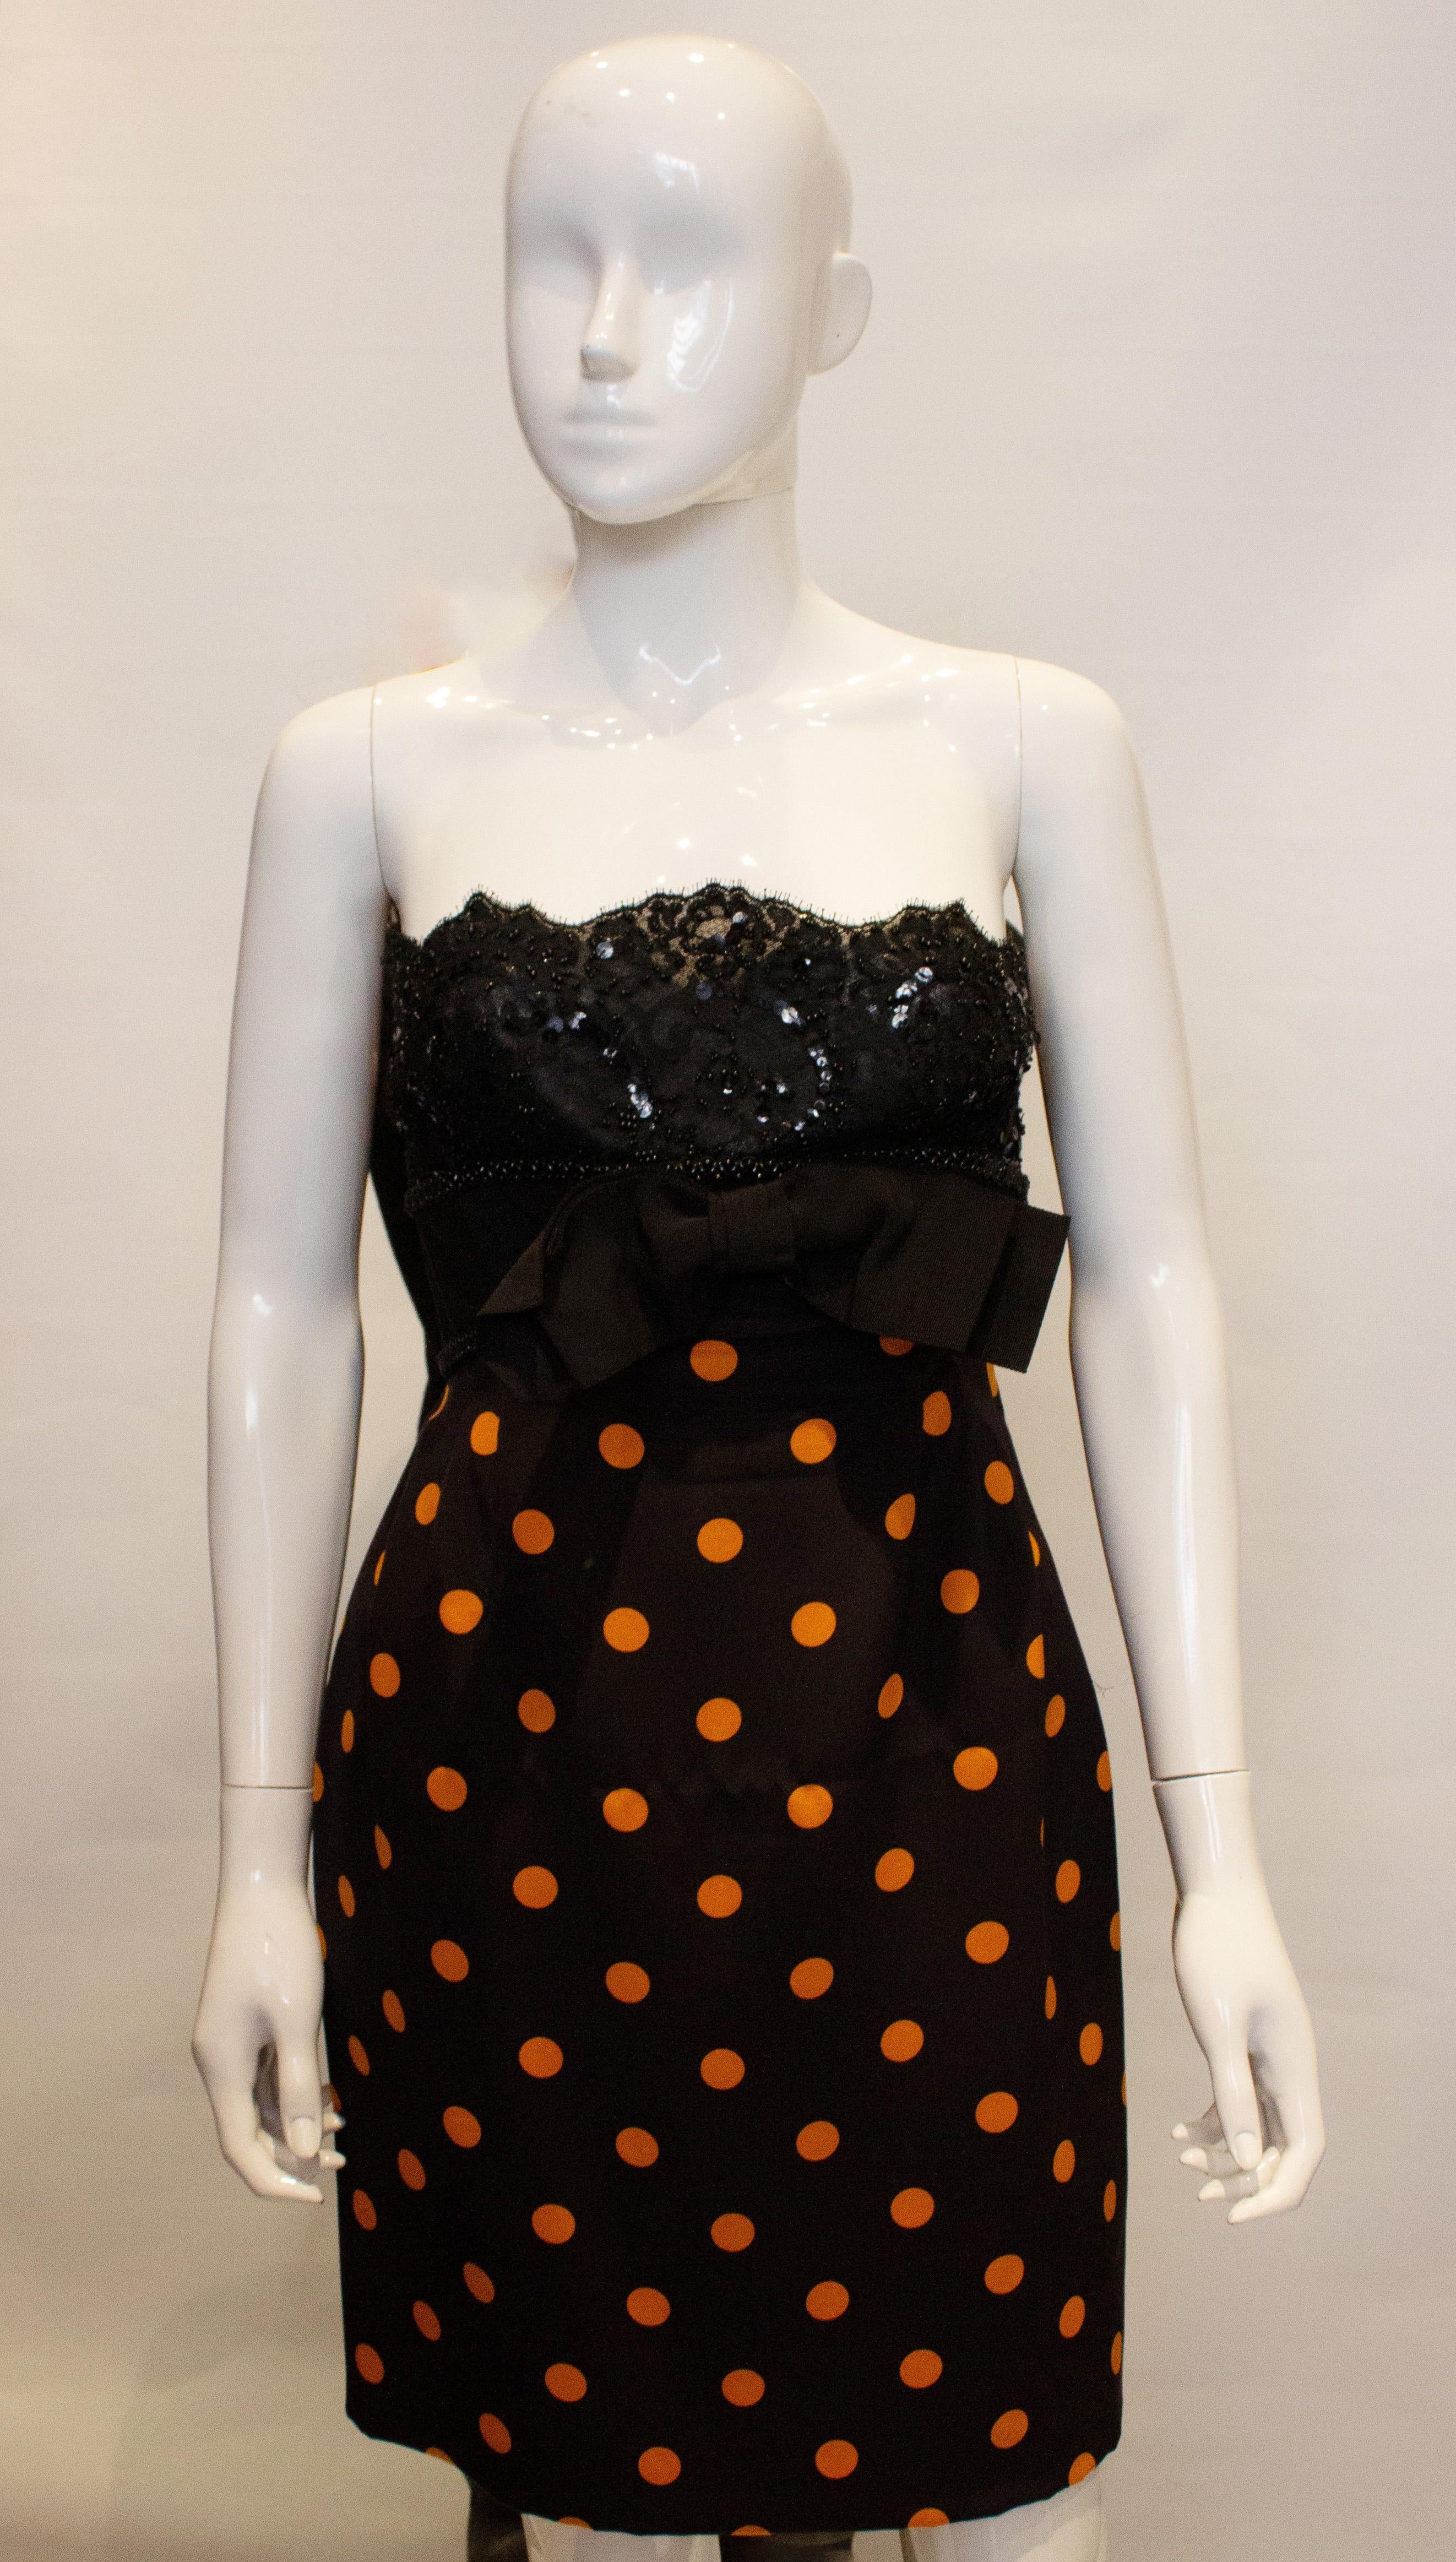 A chic and pretty vintage cocktail dress by Odicini Couture. The dress has a lace top and spot skirt with bow at the front. It is strapless but shoulder straps could easily be added. The dress is fully lined with a side zip. Measurements: Bust 36'',